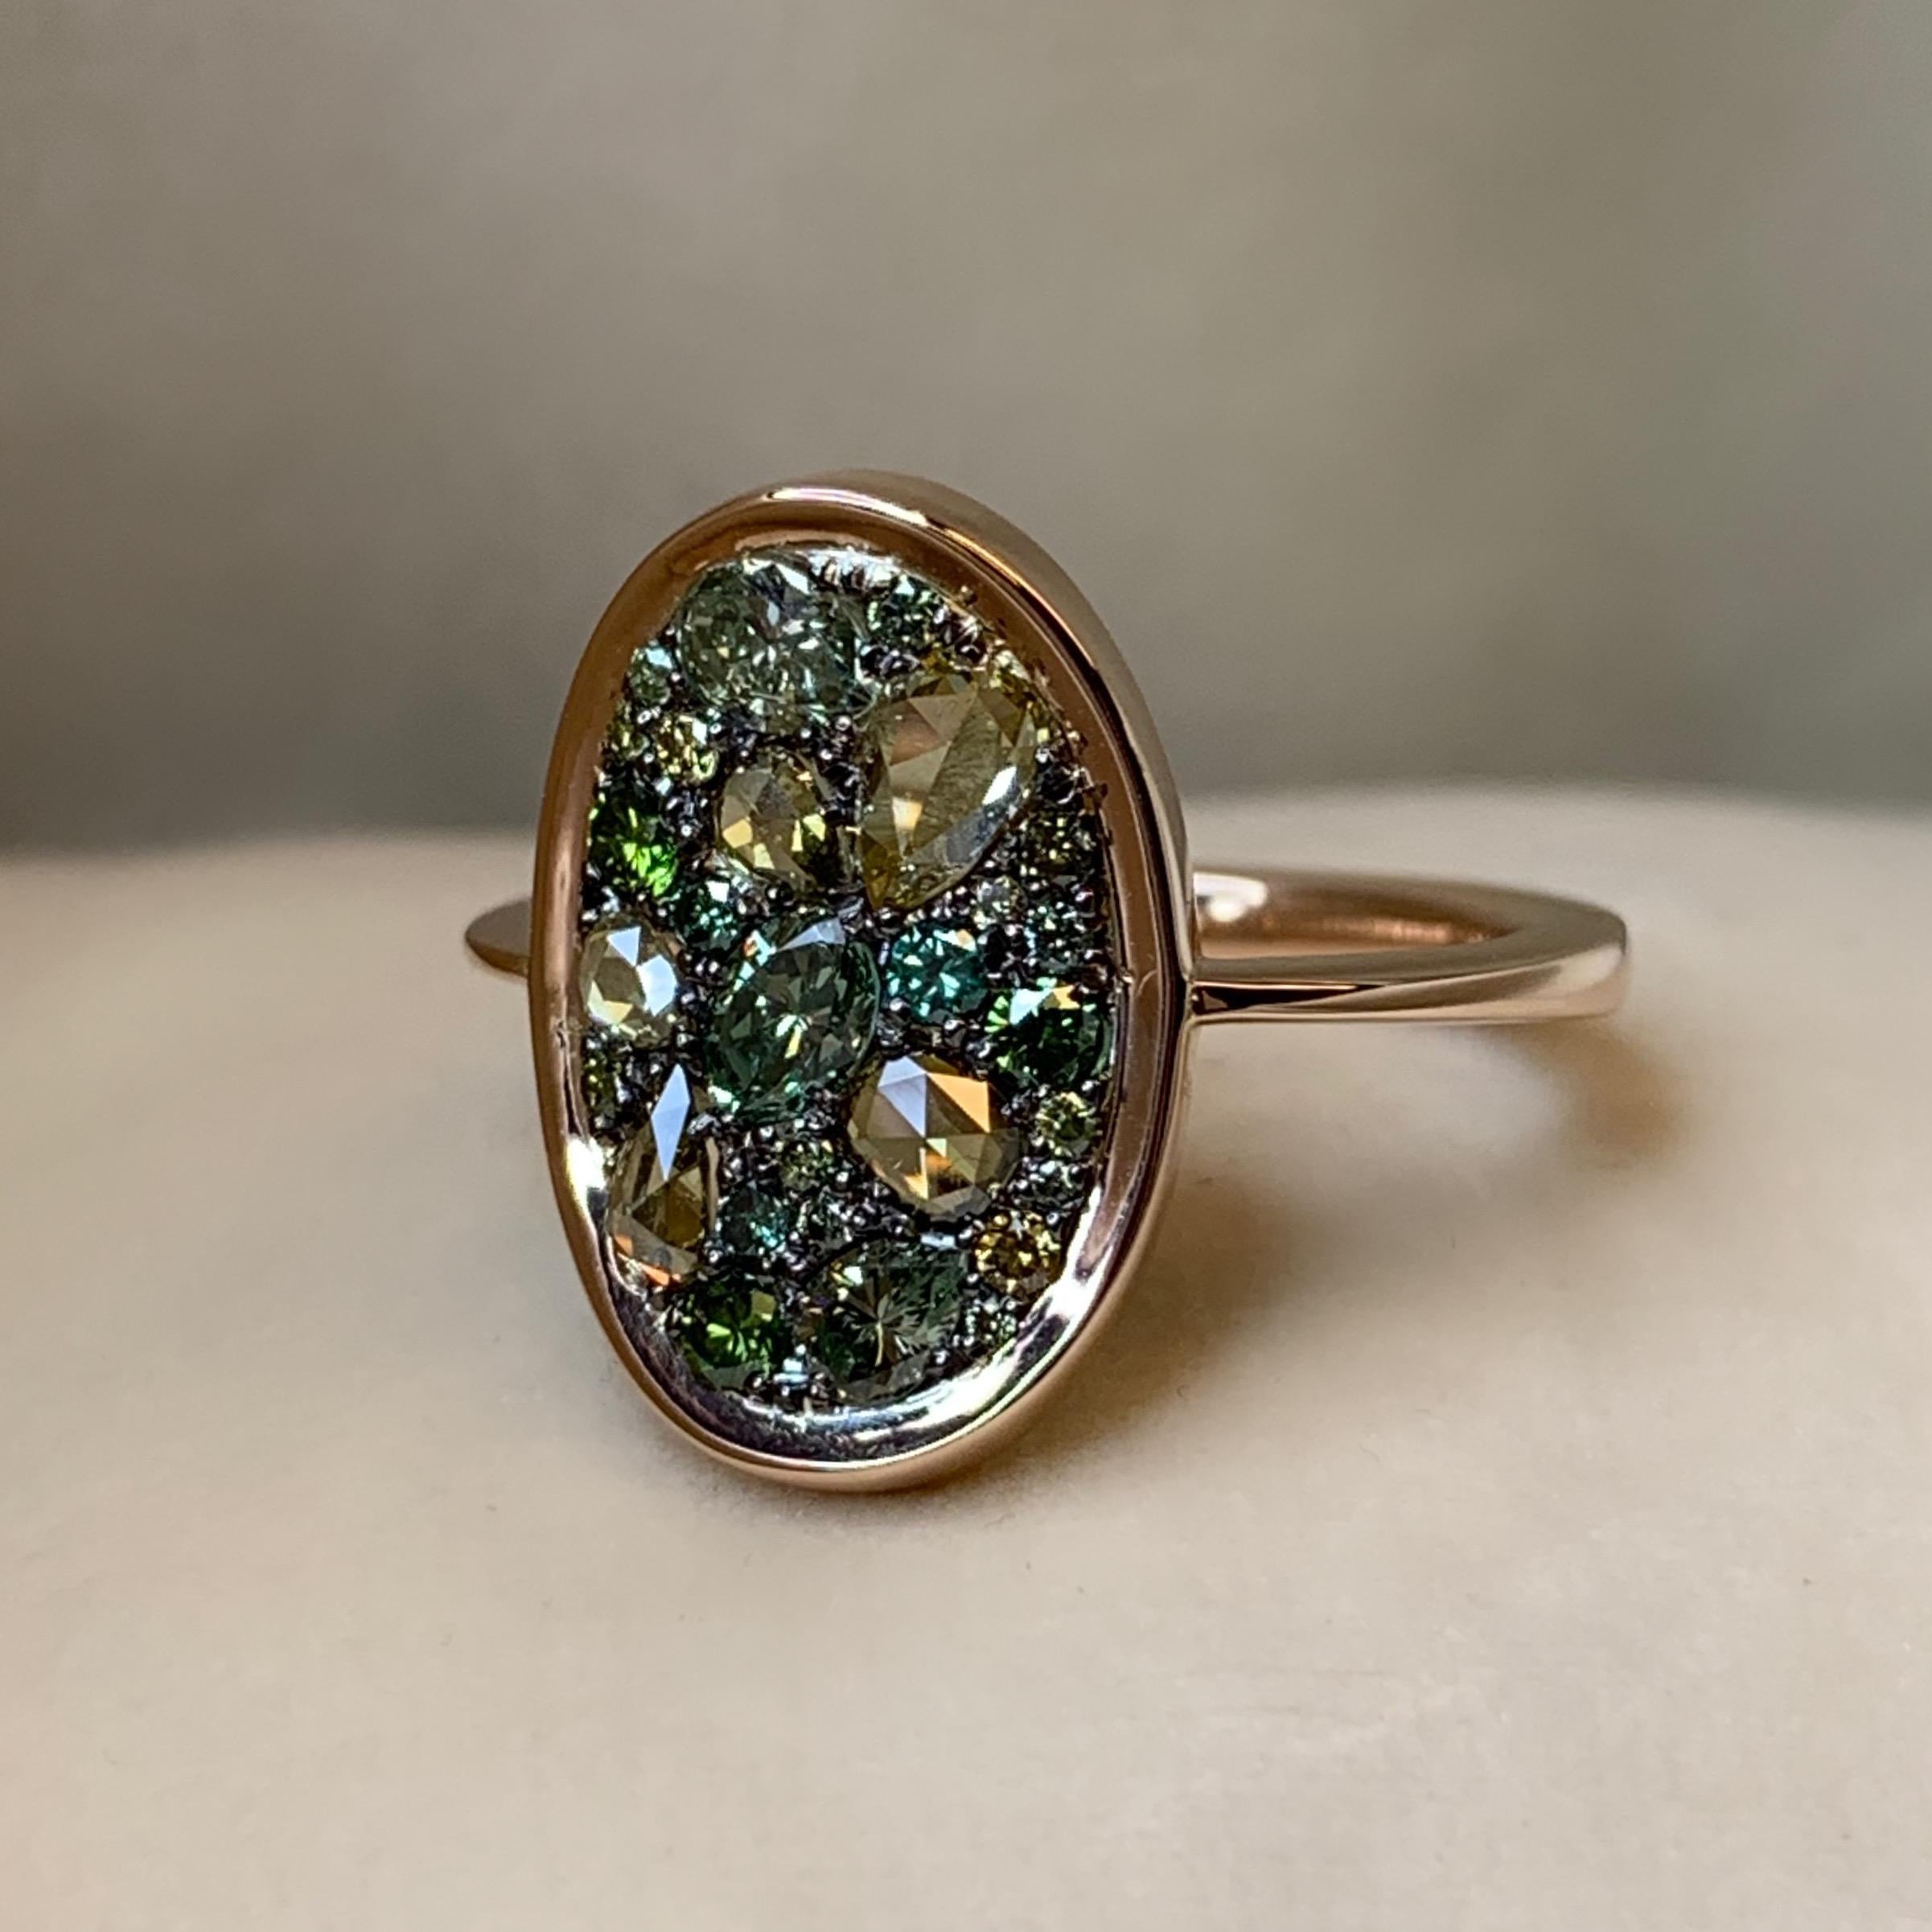 One of a kind ring in 18K Rose gold 4,7 g & blackened sterling silver (The stones are set on silver to create a black background for the stones)
Set with Fancy olive green rose-cut diamonds, fancy olive green & natural coloured green brilliant-cut